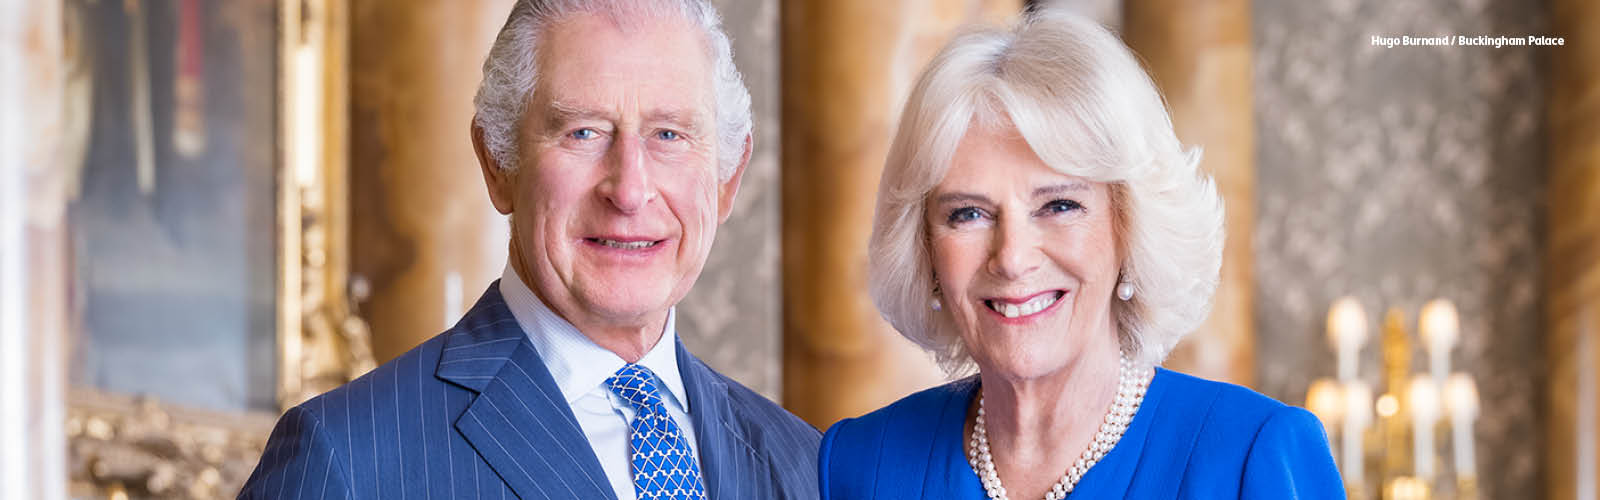 An official photo of King Charles III and Camilla, Queen Consort